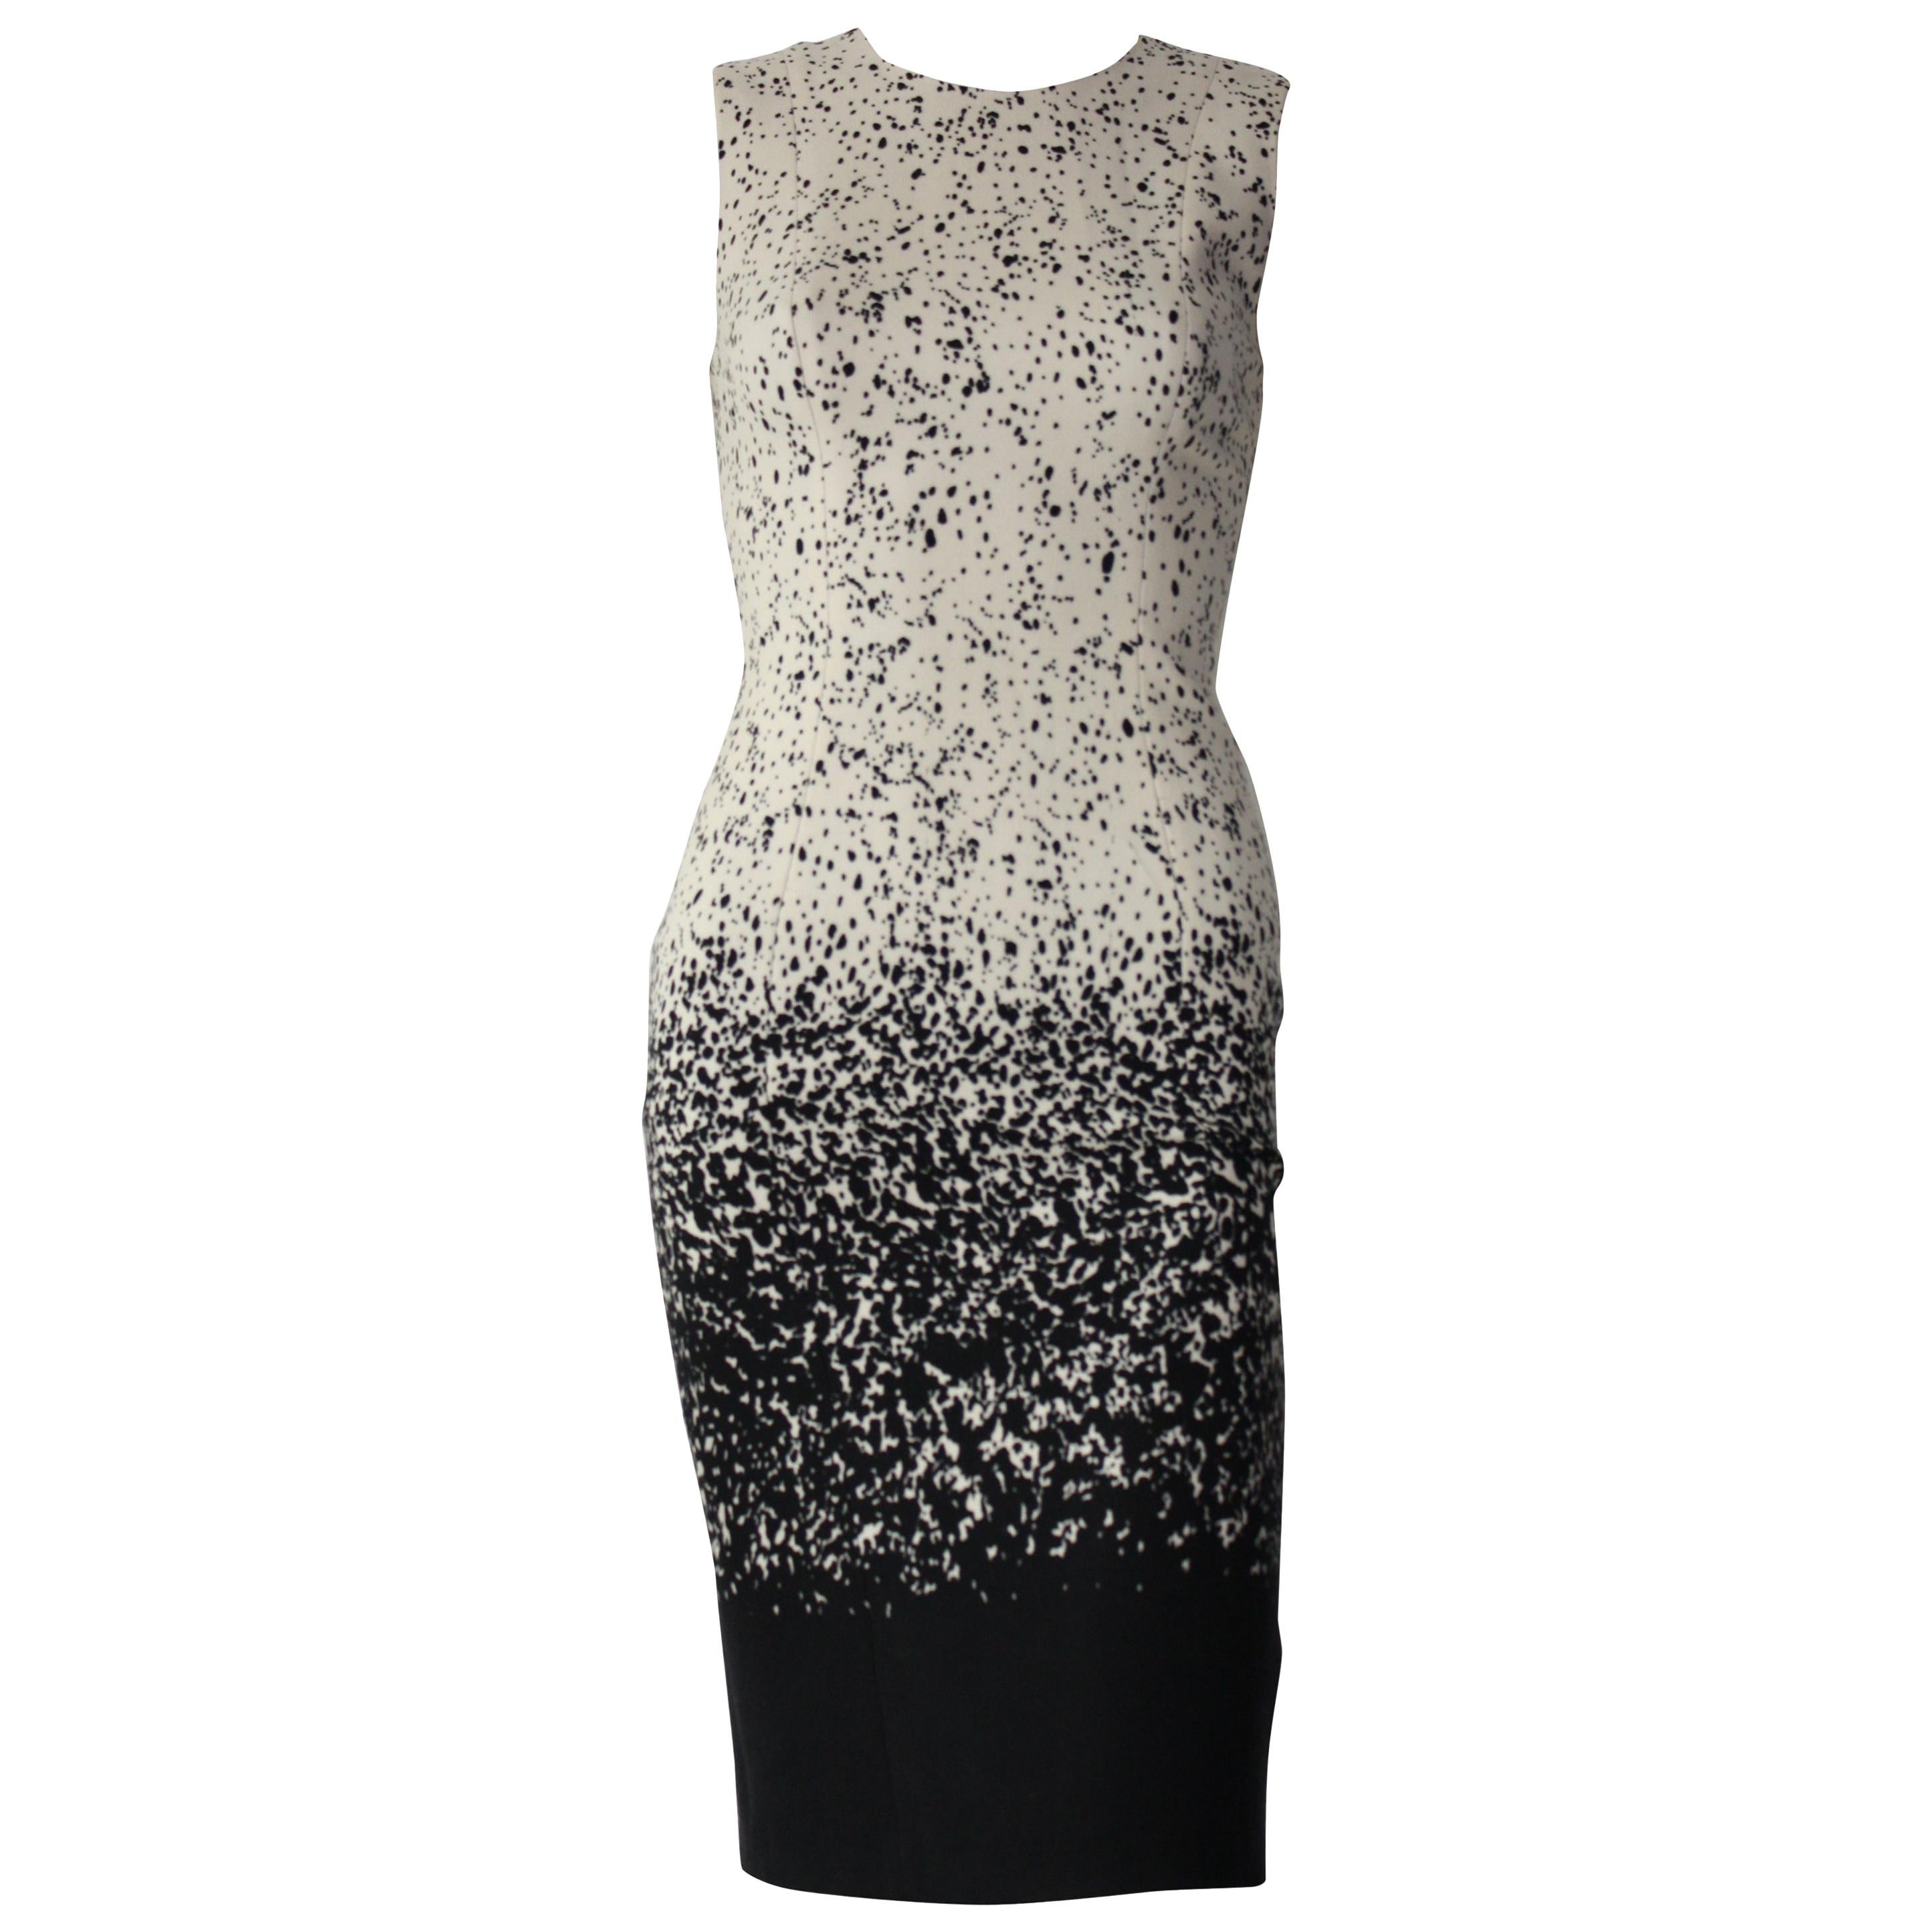 Burberry Wool Black and White Speckle Shift Dress Size 38